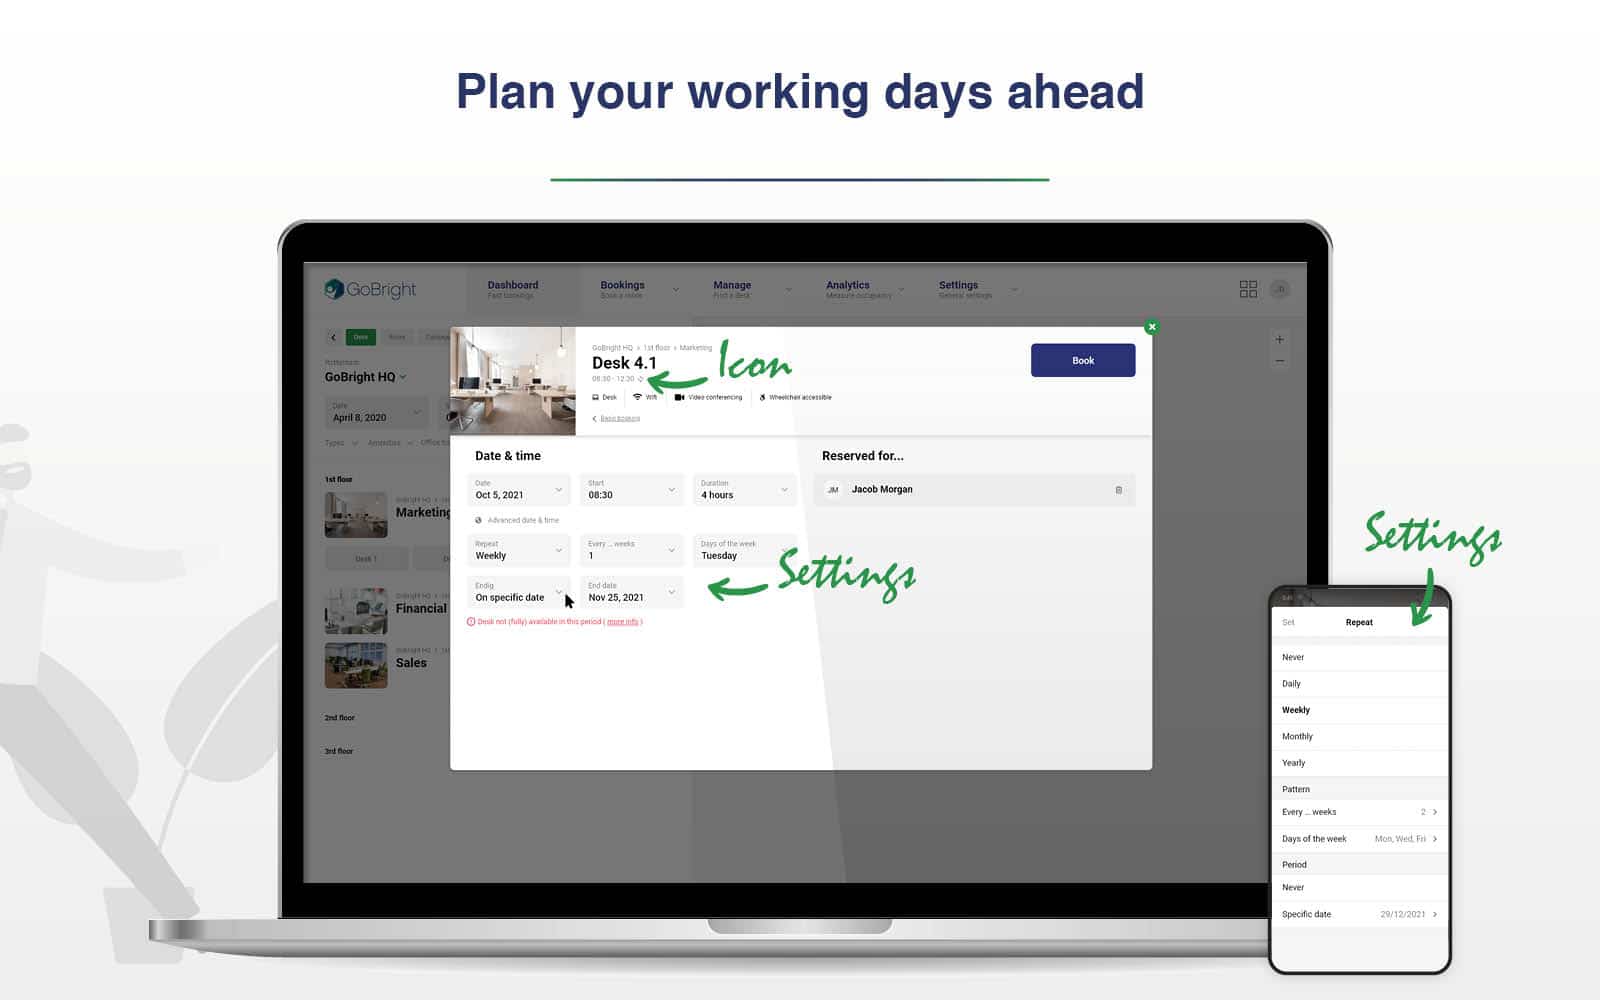 Recurring desk booking - plan your workdays ahead